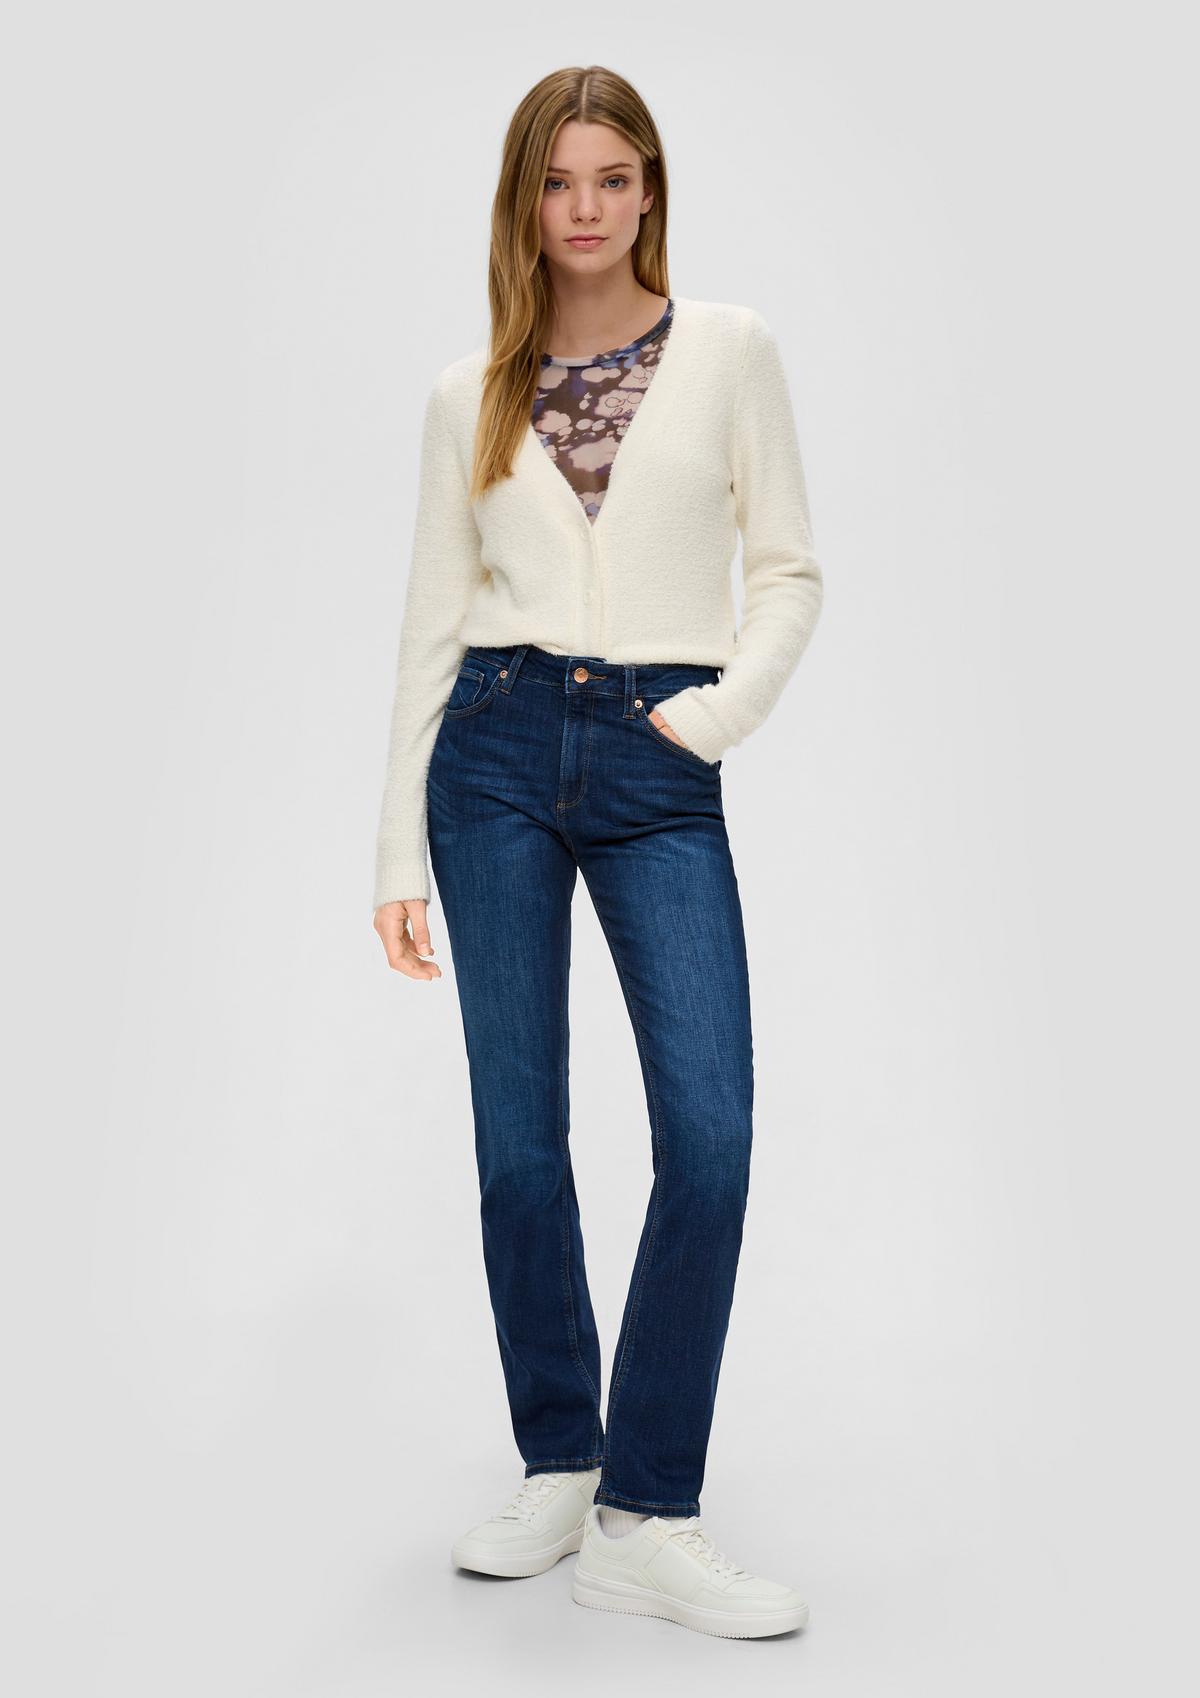 s.Oliver Jeans Catie / Slim Fit / High Rise / Straight Leg